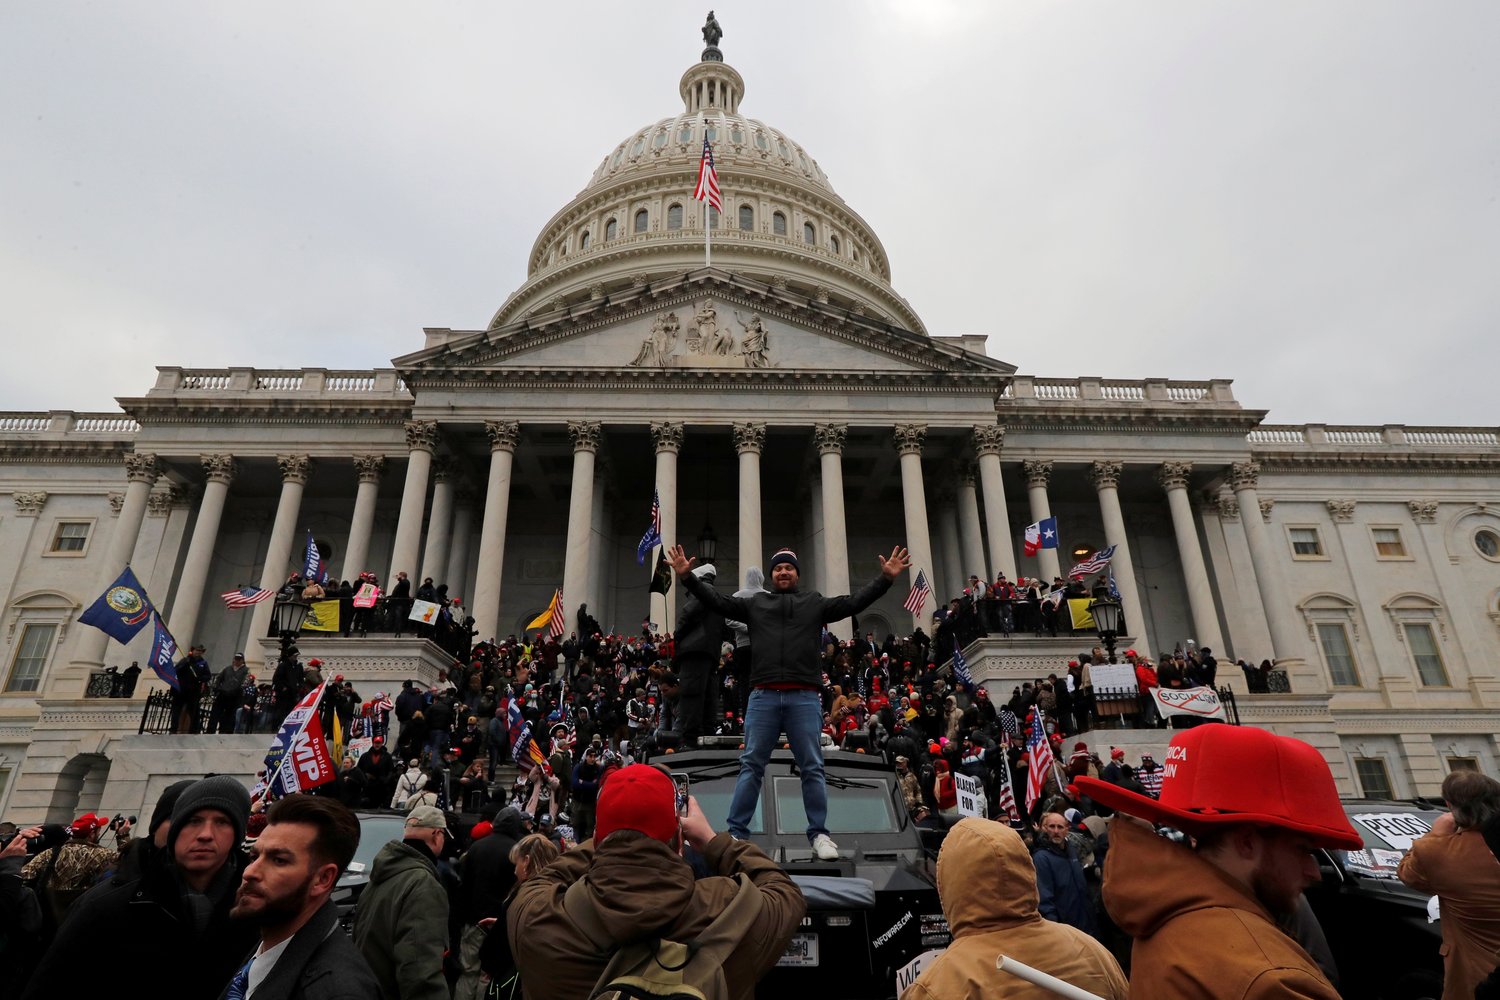 Supporters of U.S. President Donald Trump climb on walls at the U.S. Capitol during a protest against the certification of the 2020 U.S. presidential election results by the U.S. Congress, in Washington, D.C. in this Jan. 6, 2021, file photo. A year after the assault on the Capitol, the Vatican newspaper says it was “a direct blow to the heart of American democracy.”